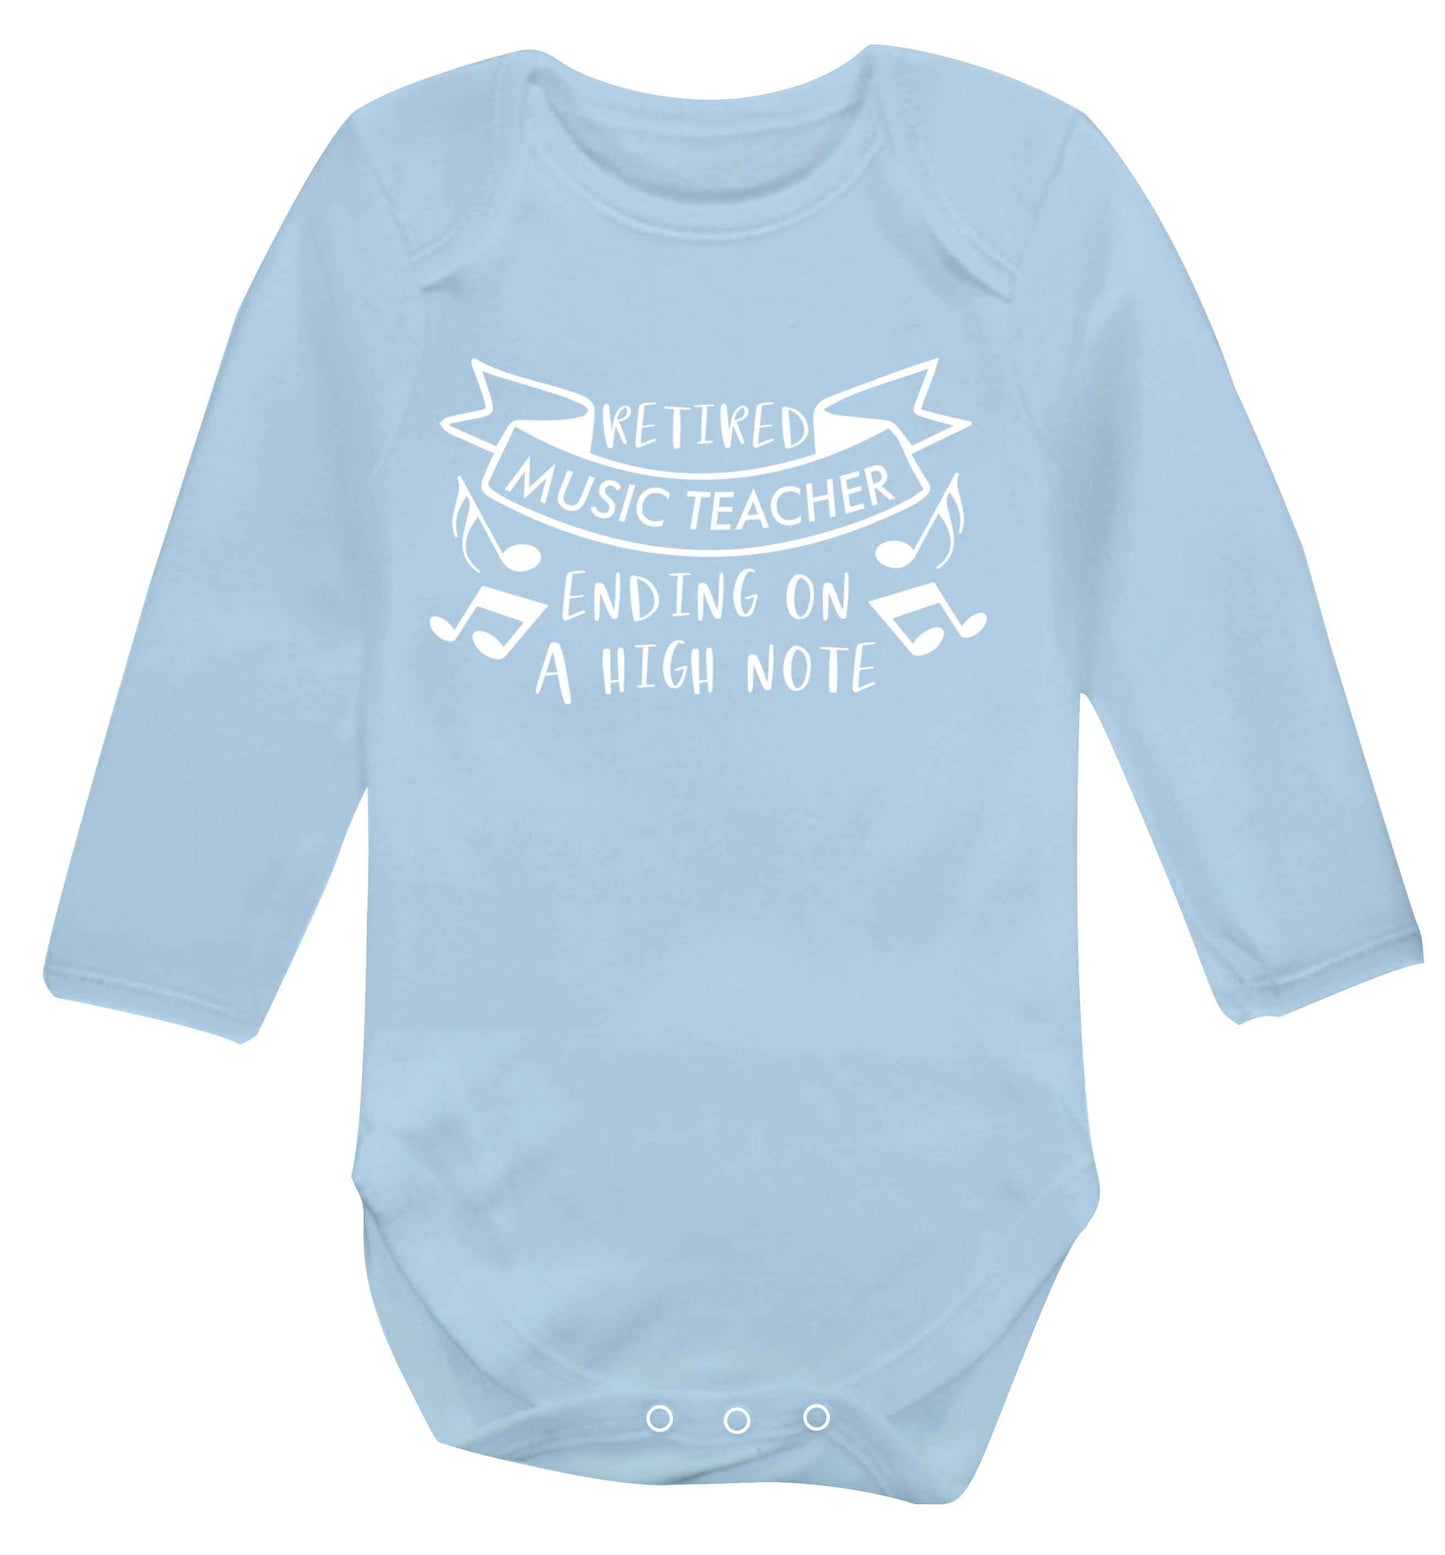 Retired music teacher ending on a high note Baby Vest long sleeved pale blue 6-12 months